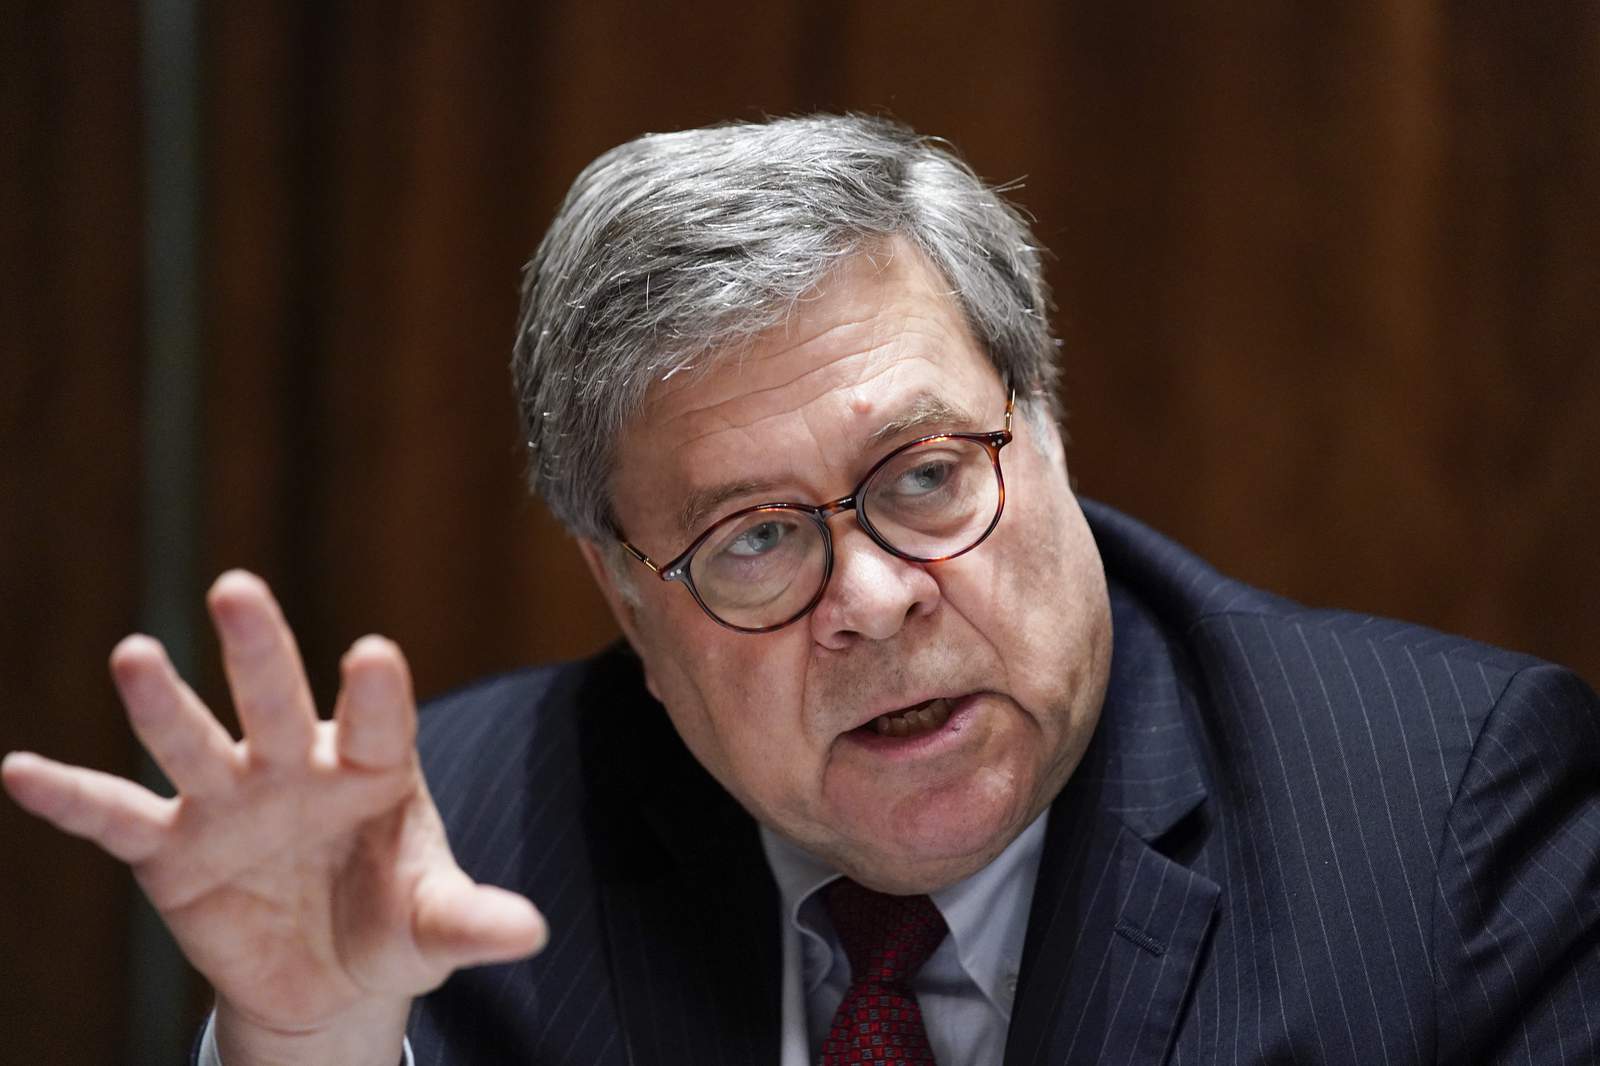 Barr able to put his stamp on executive power as Trump's AG